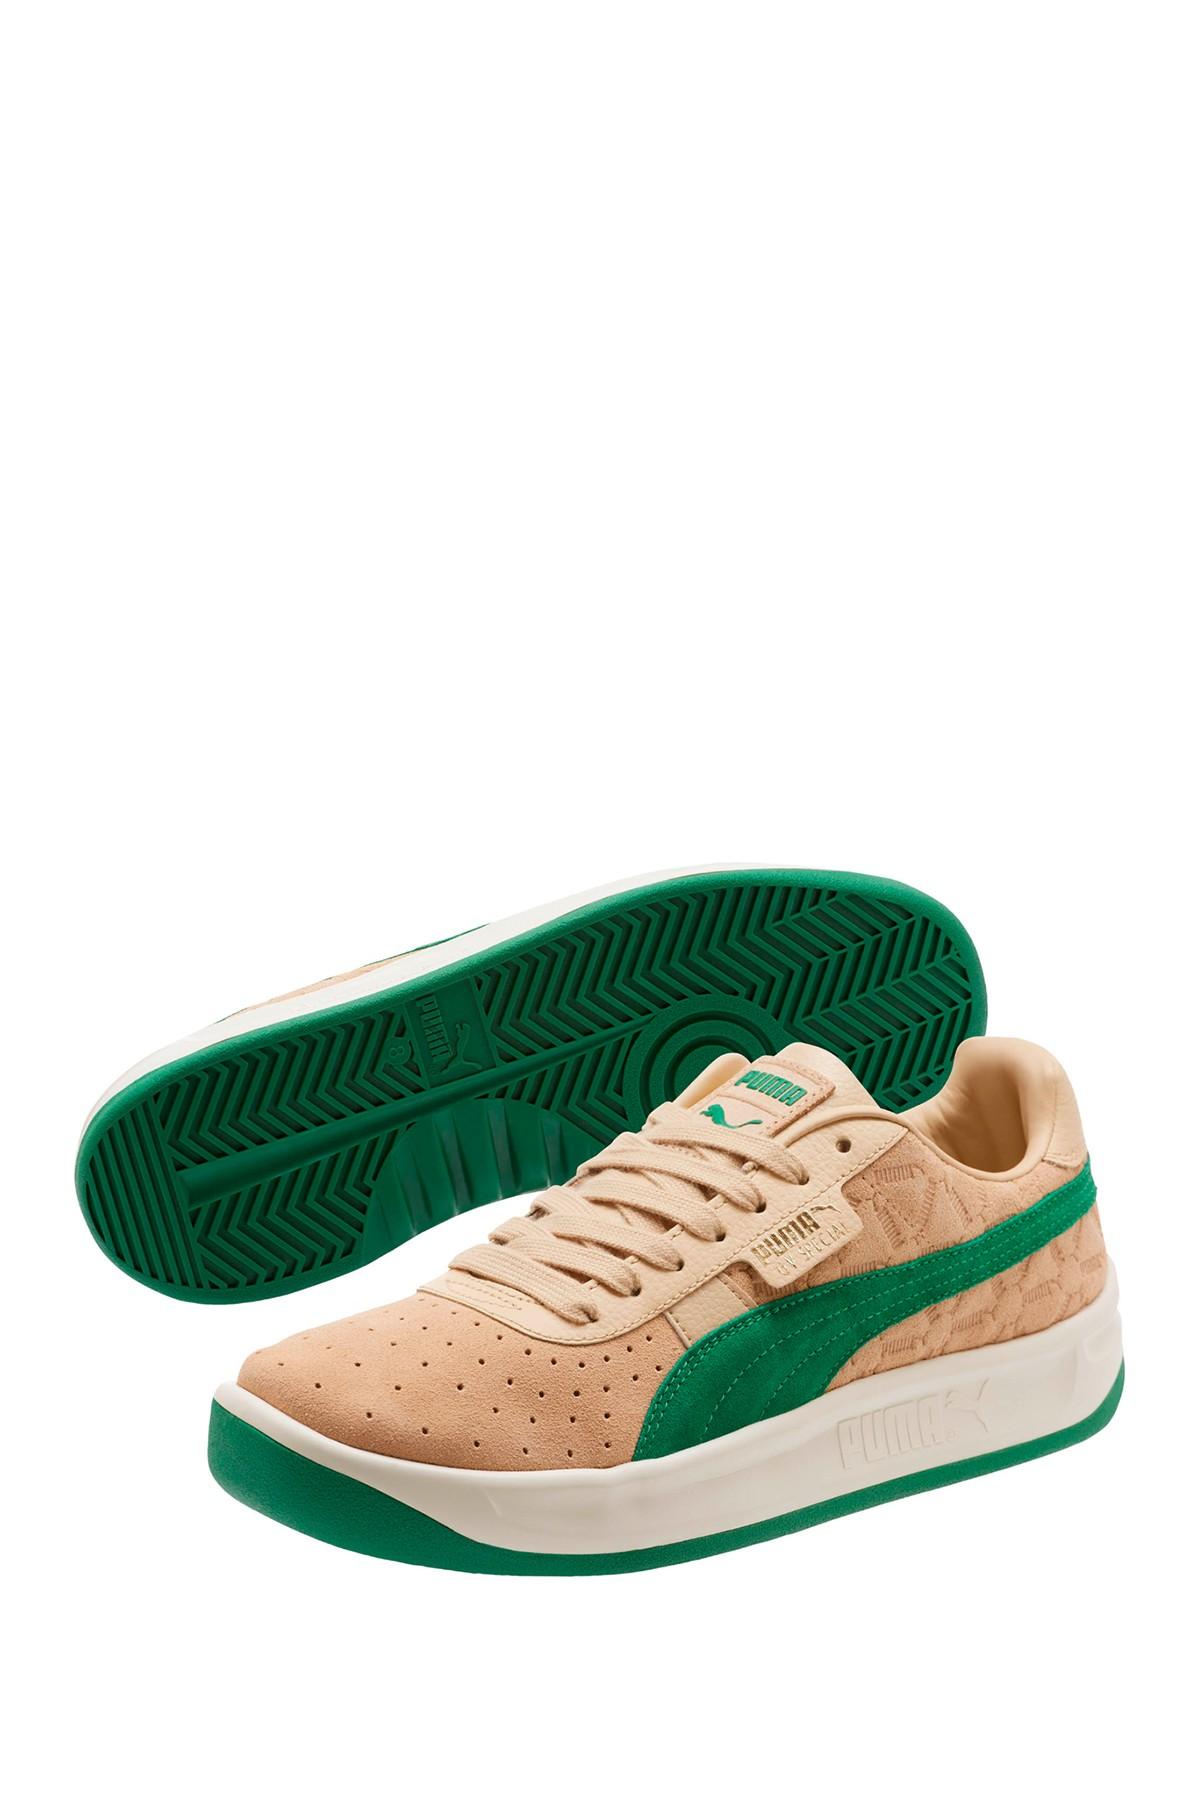 PUMA Suede Gv Special Lux Sneakers in Beige (Green) for Men - Lyst